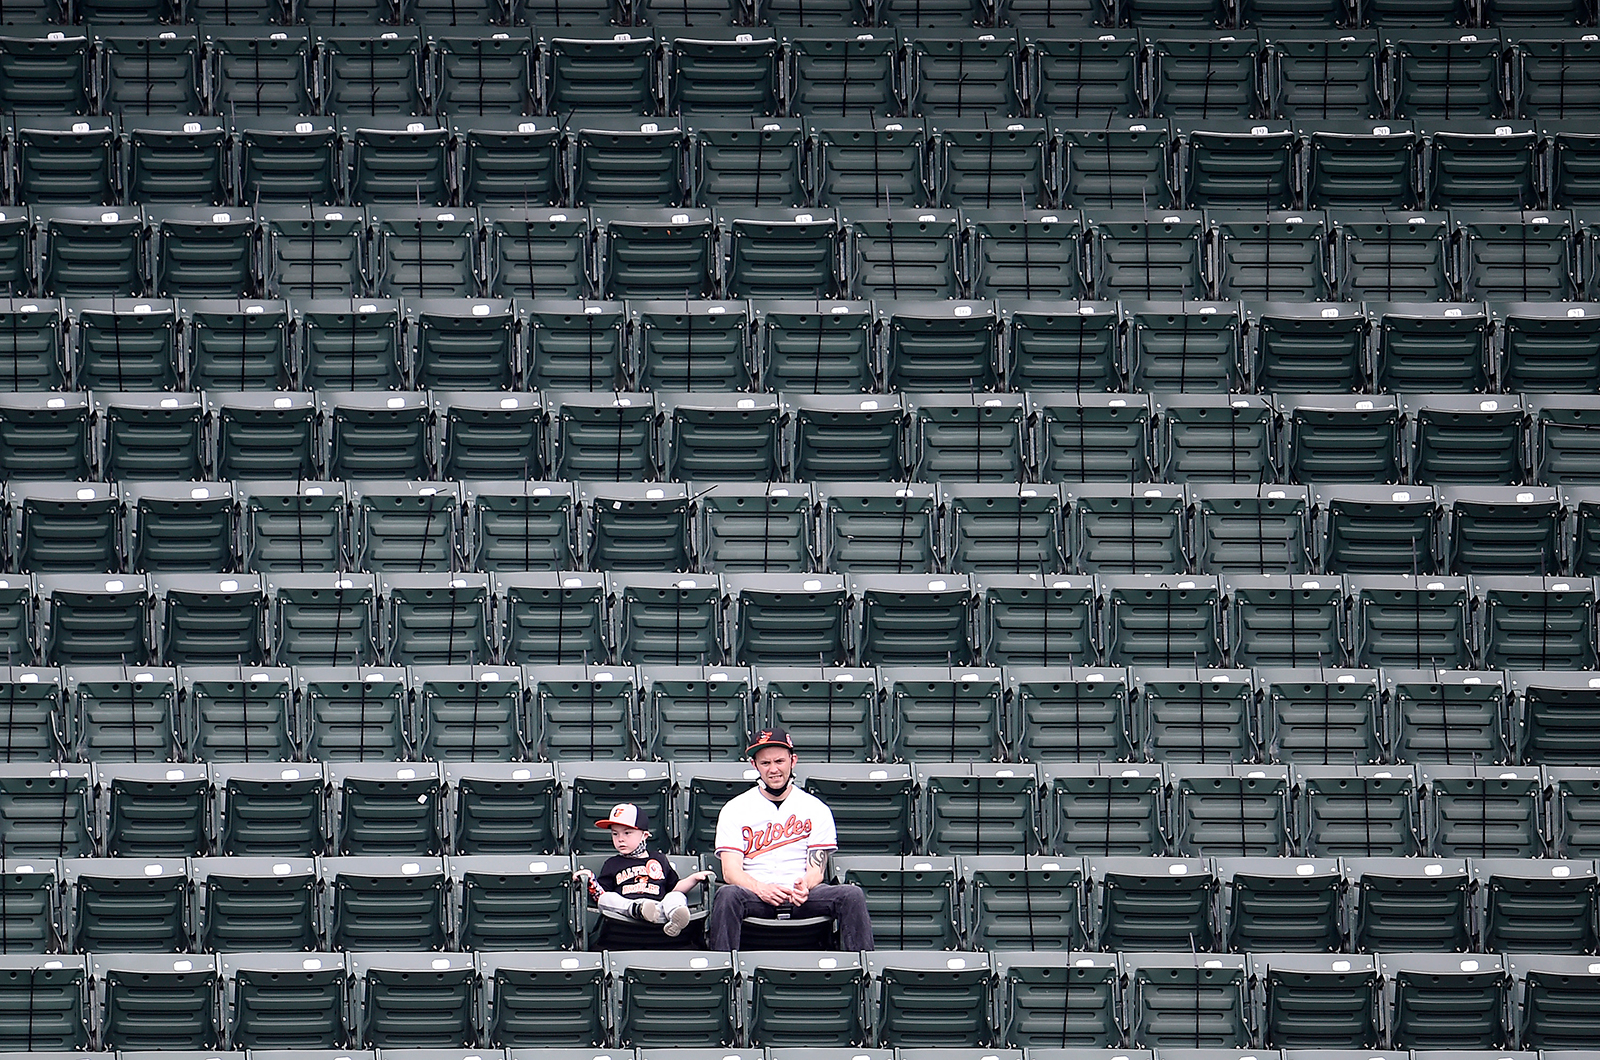 Fans look on during the second inning of the game between the Baltimore Orioles and the New York Yankees at Oriole Park at Camden Yards on April 29, in Baltimore. 